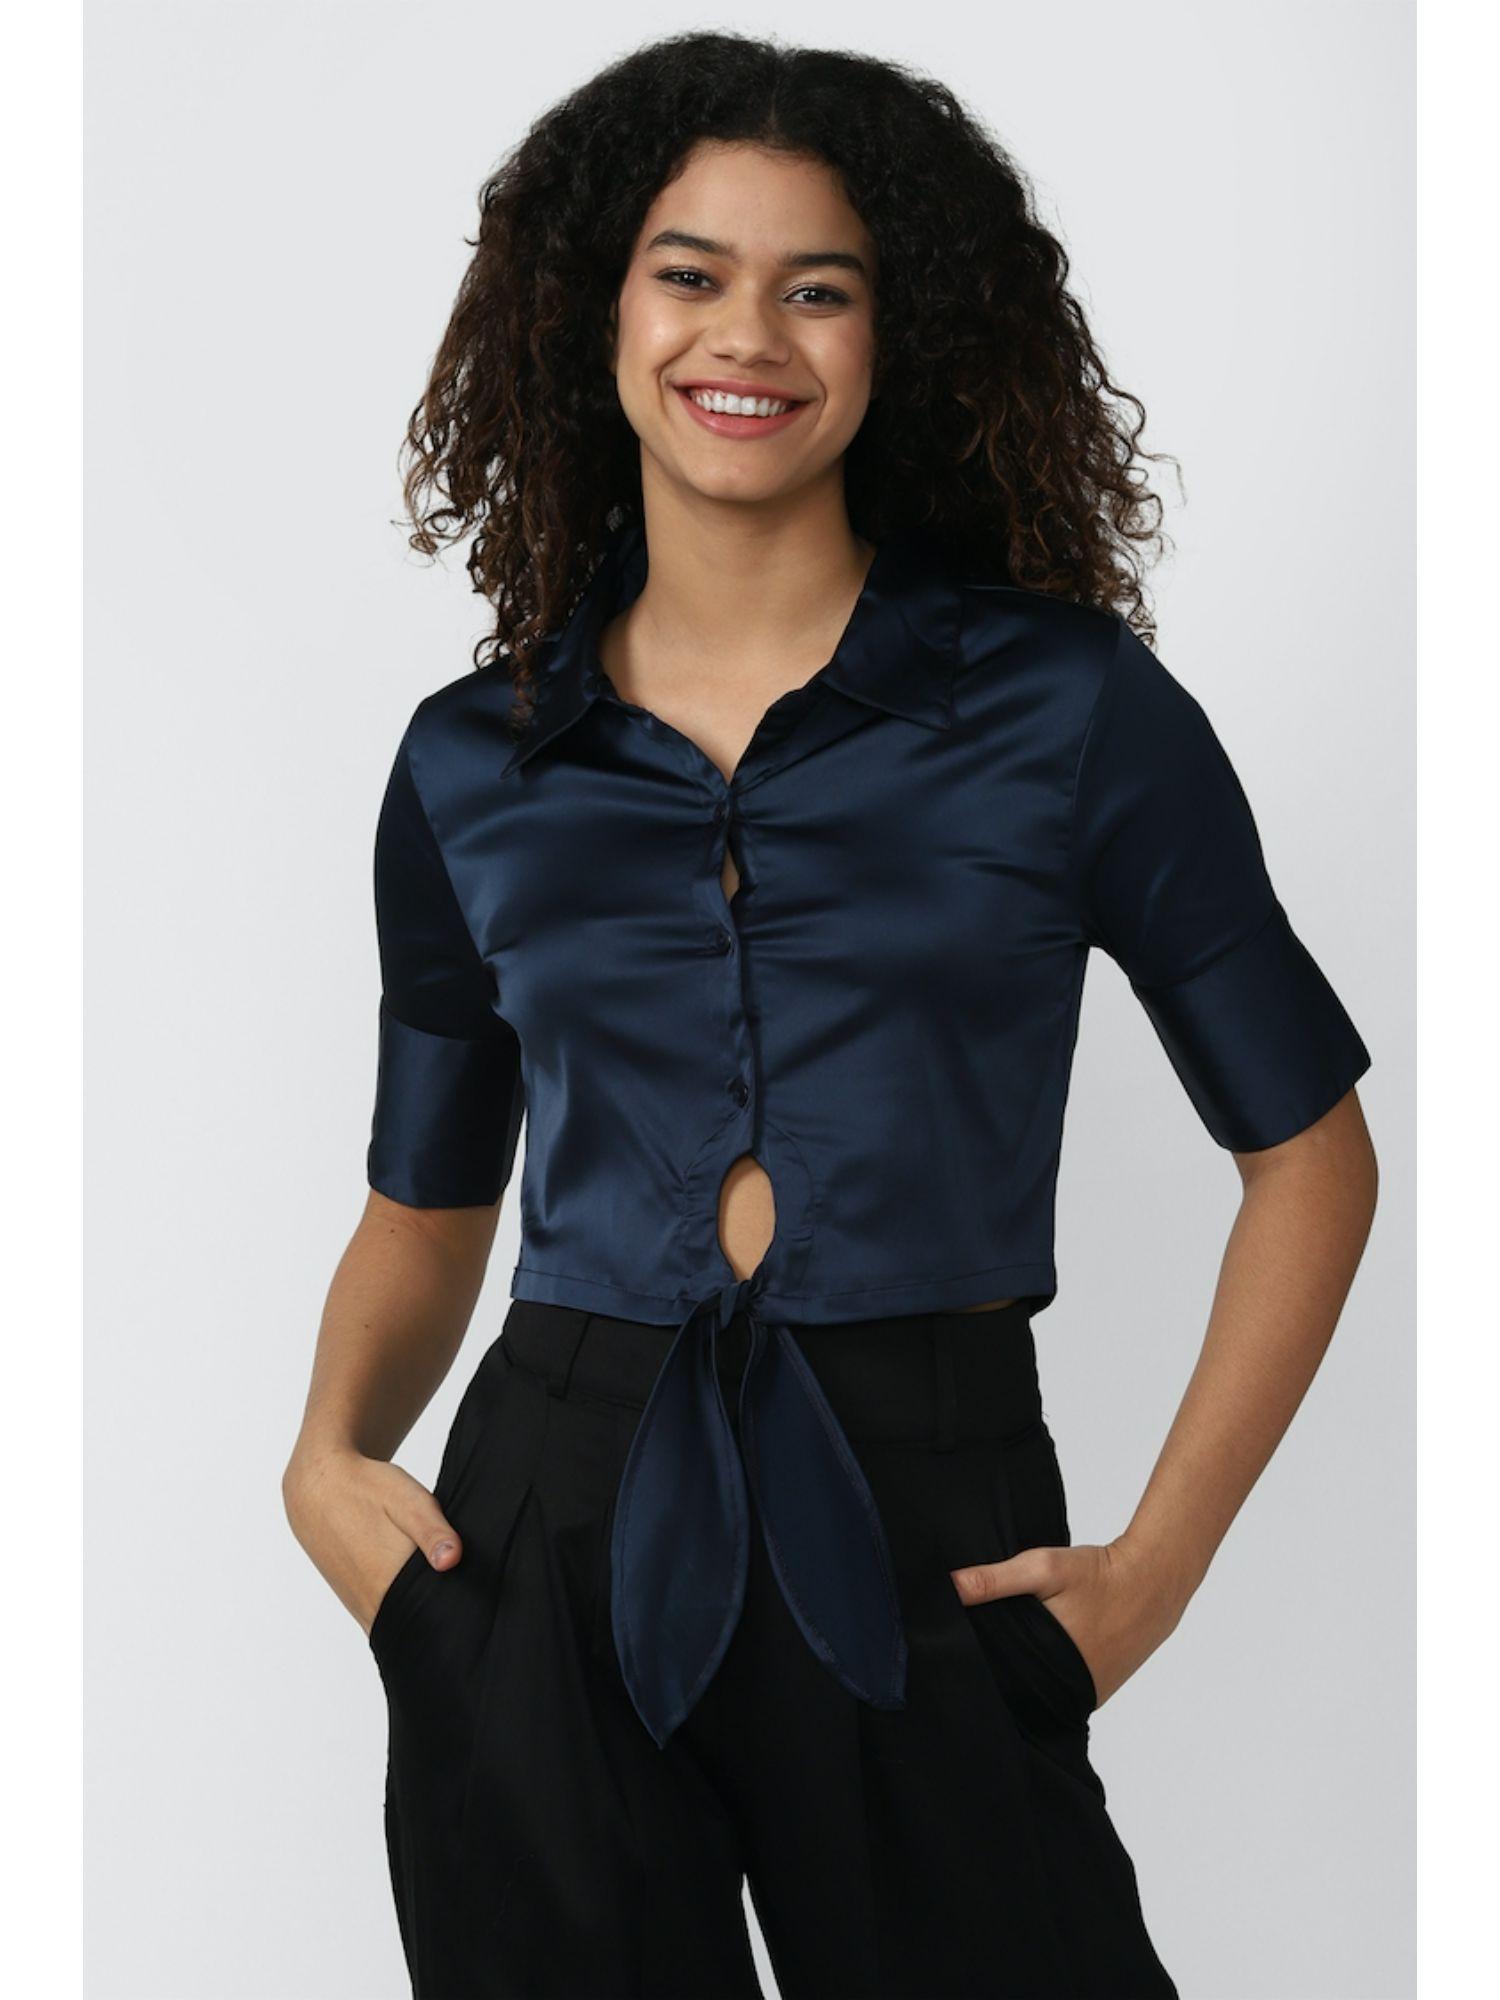 solid navy blue shirt